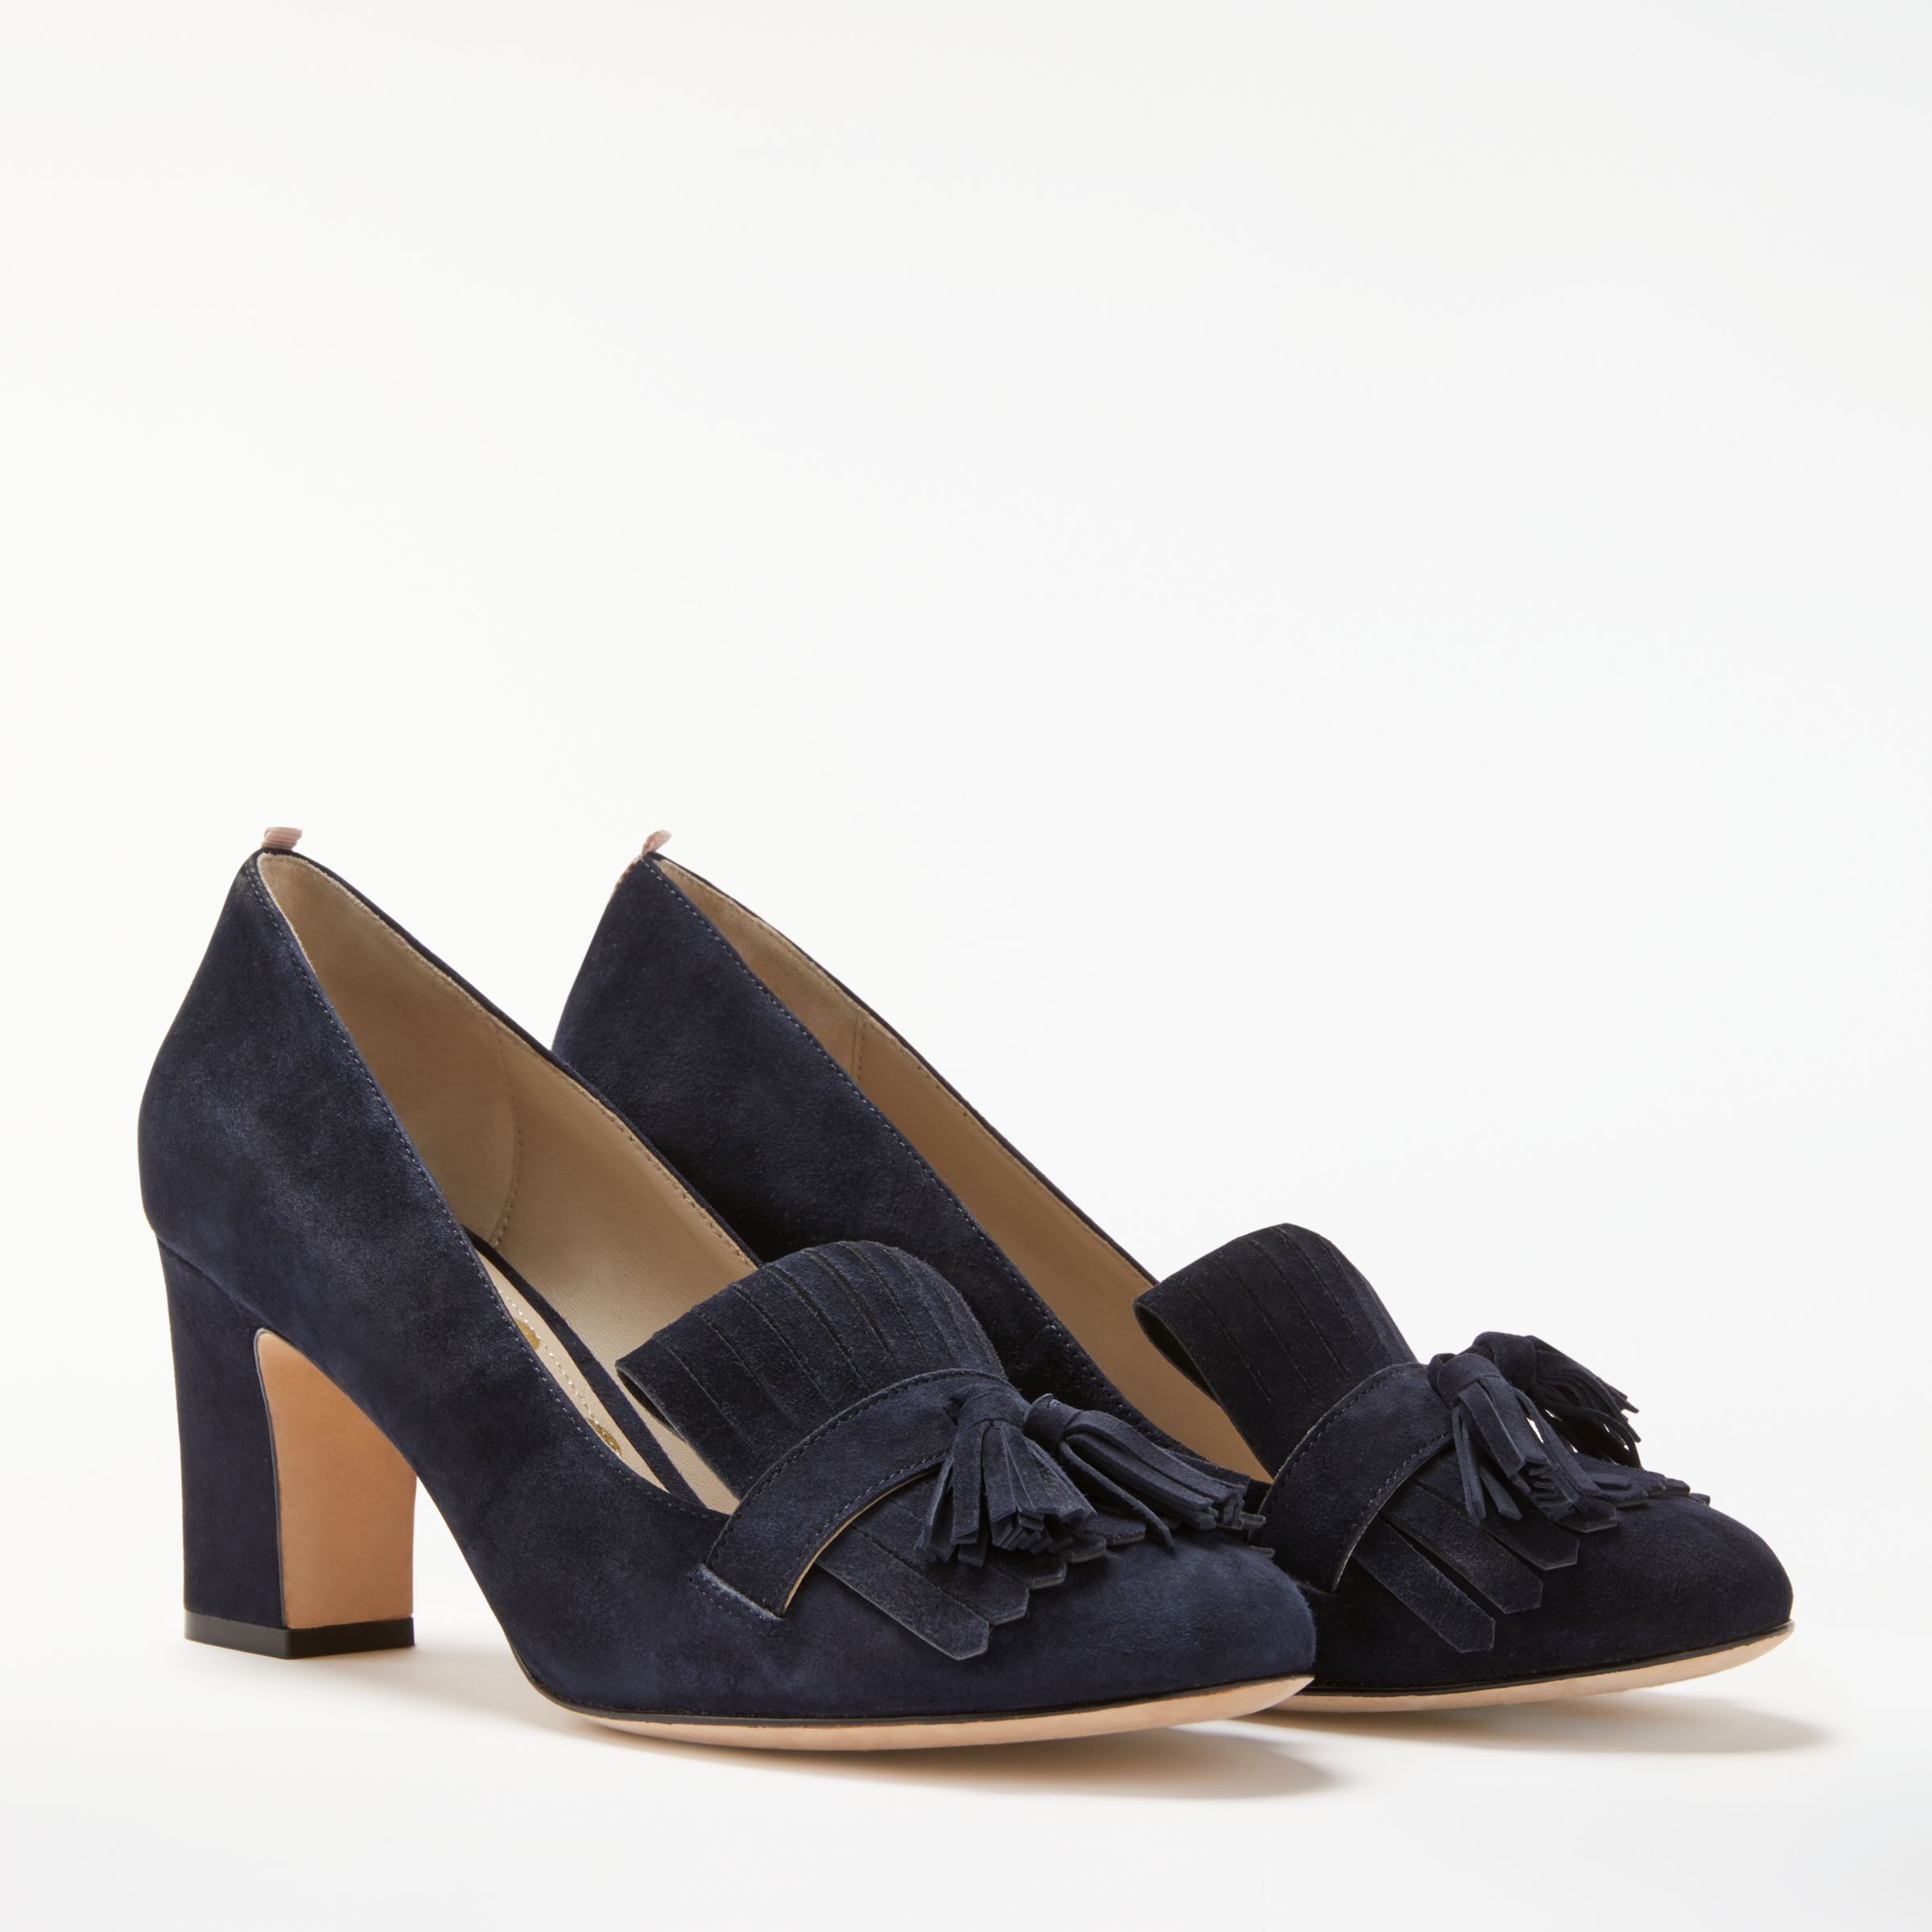 Boden Pippa Block Heeled Loafer Court Shoes, Navy Suede